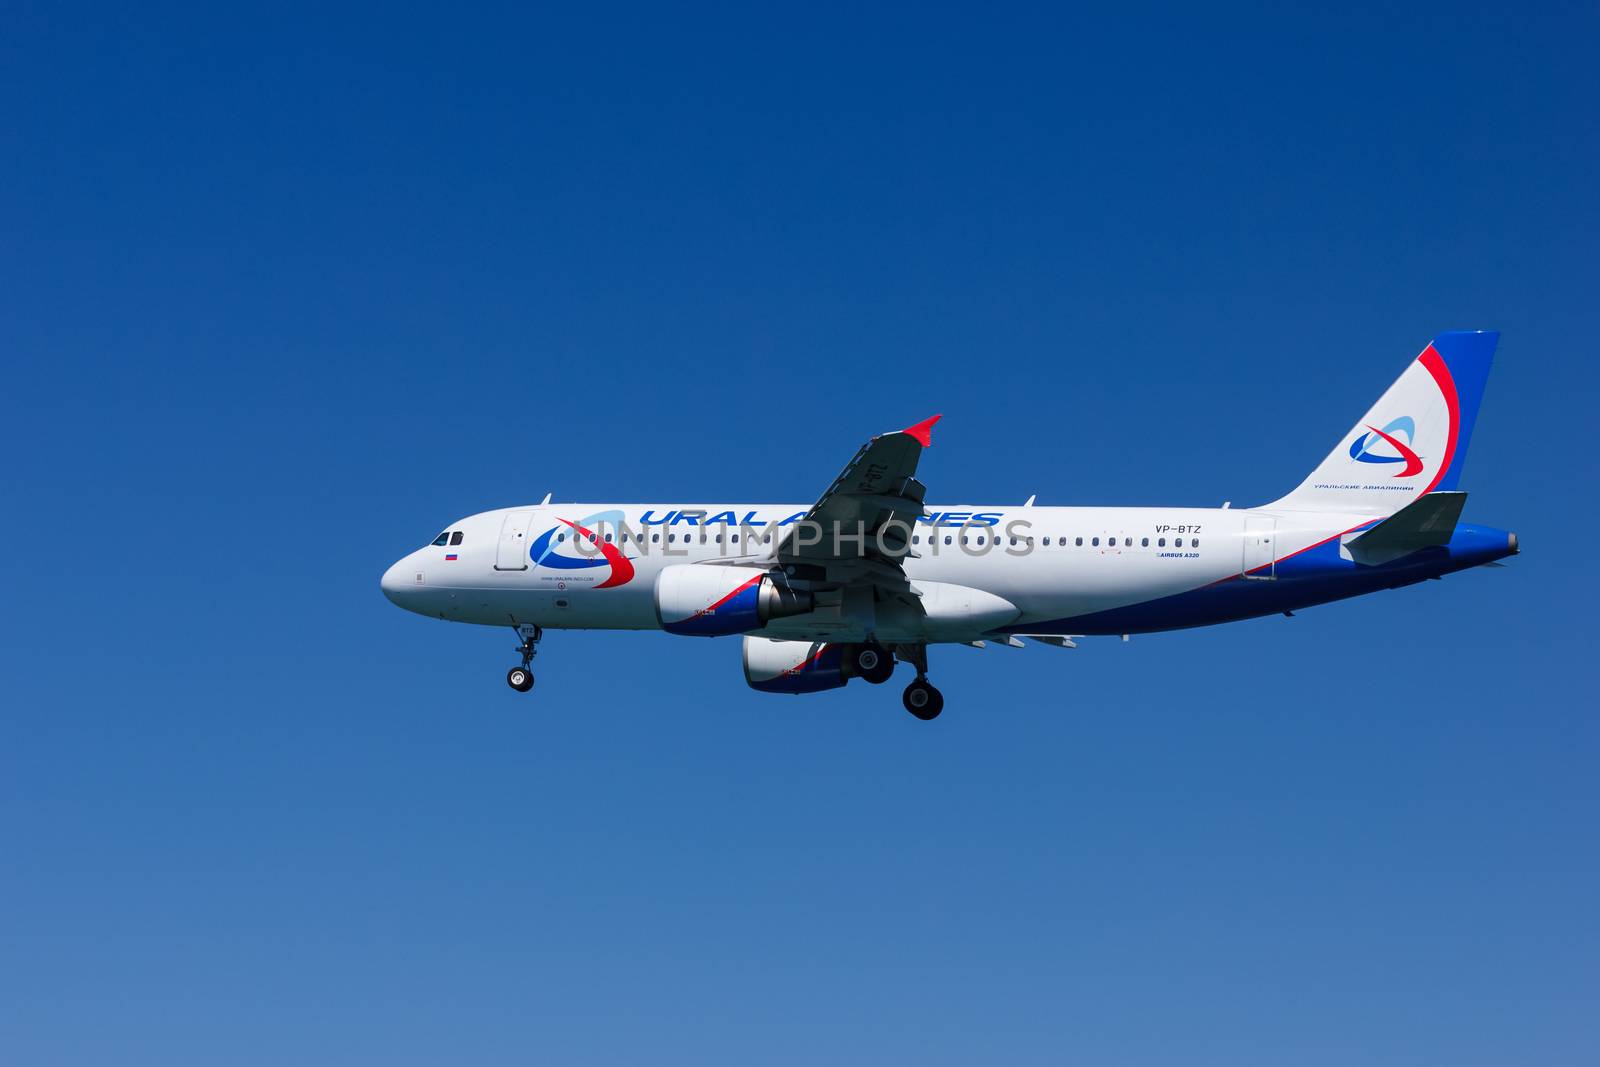 Ural Airlines Airlines Airbus A320-214 by Slast20